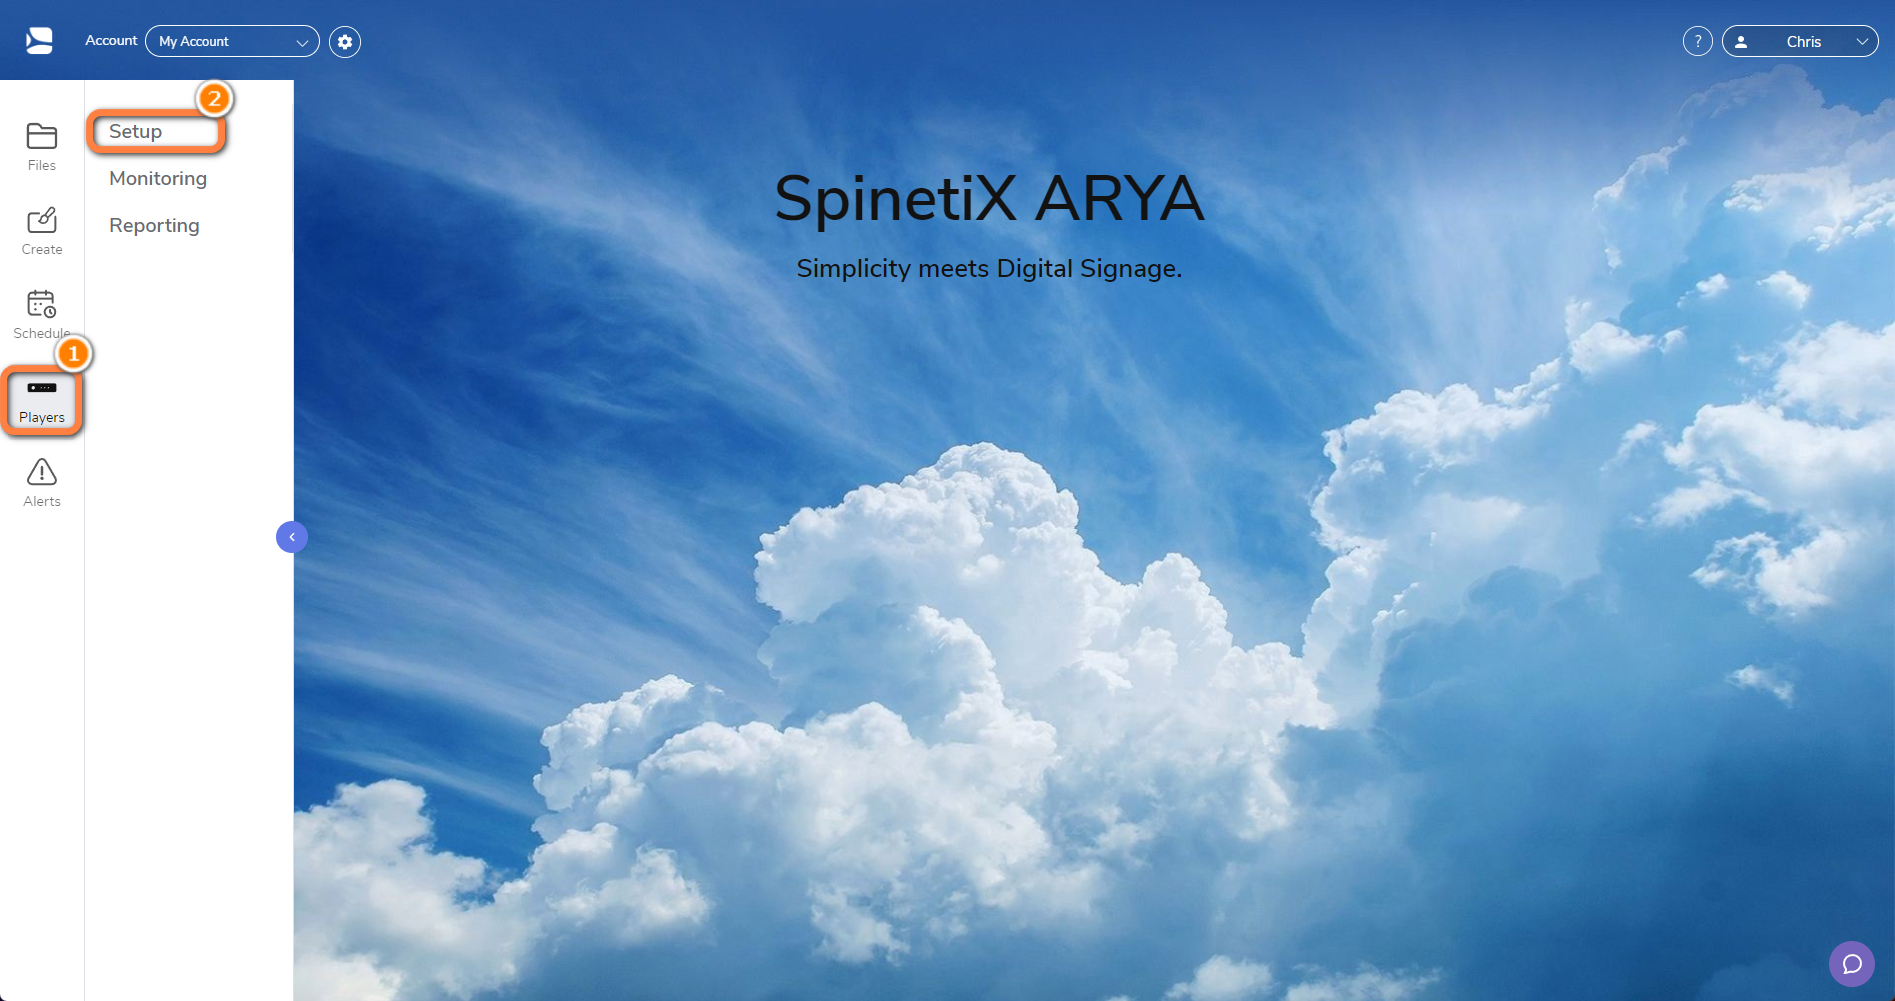 spinetix-arya-main-screen-with-accounts-button-players-marked.png